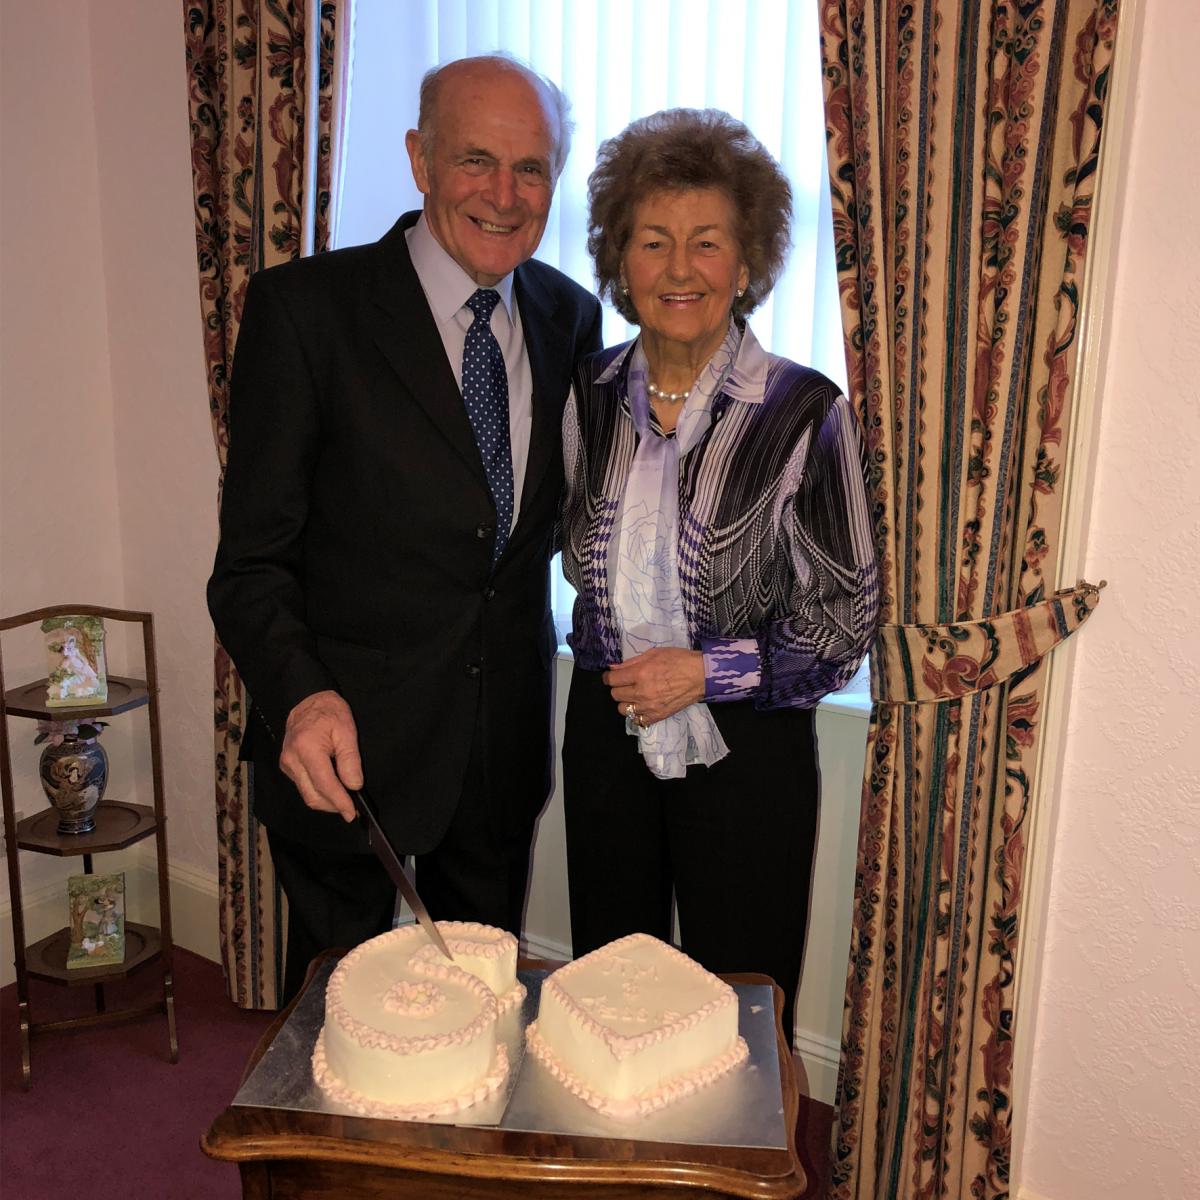  Jim and Jessie Braes from Barbachlaw Farm, East Lothian, recently celebrated 60 years of married life. The couple celebrated with their family at The Tower, Edinburgh